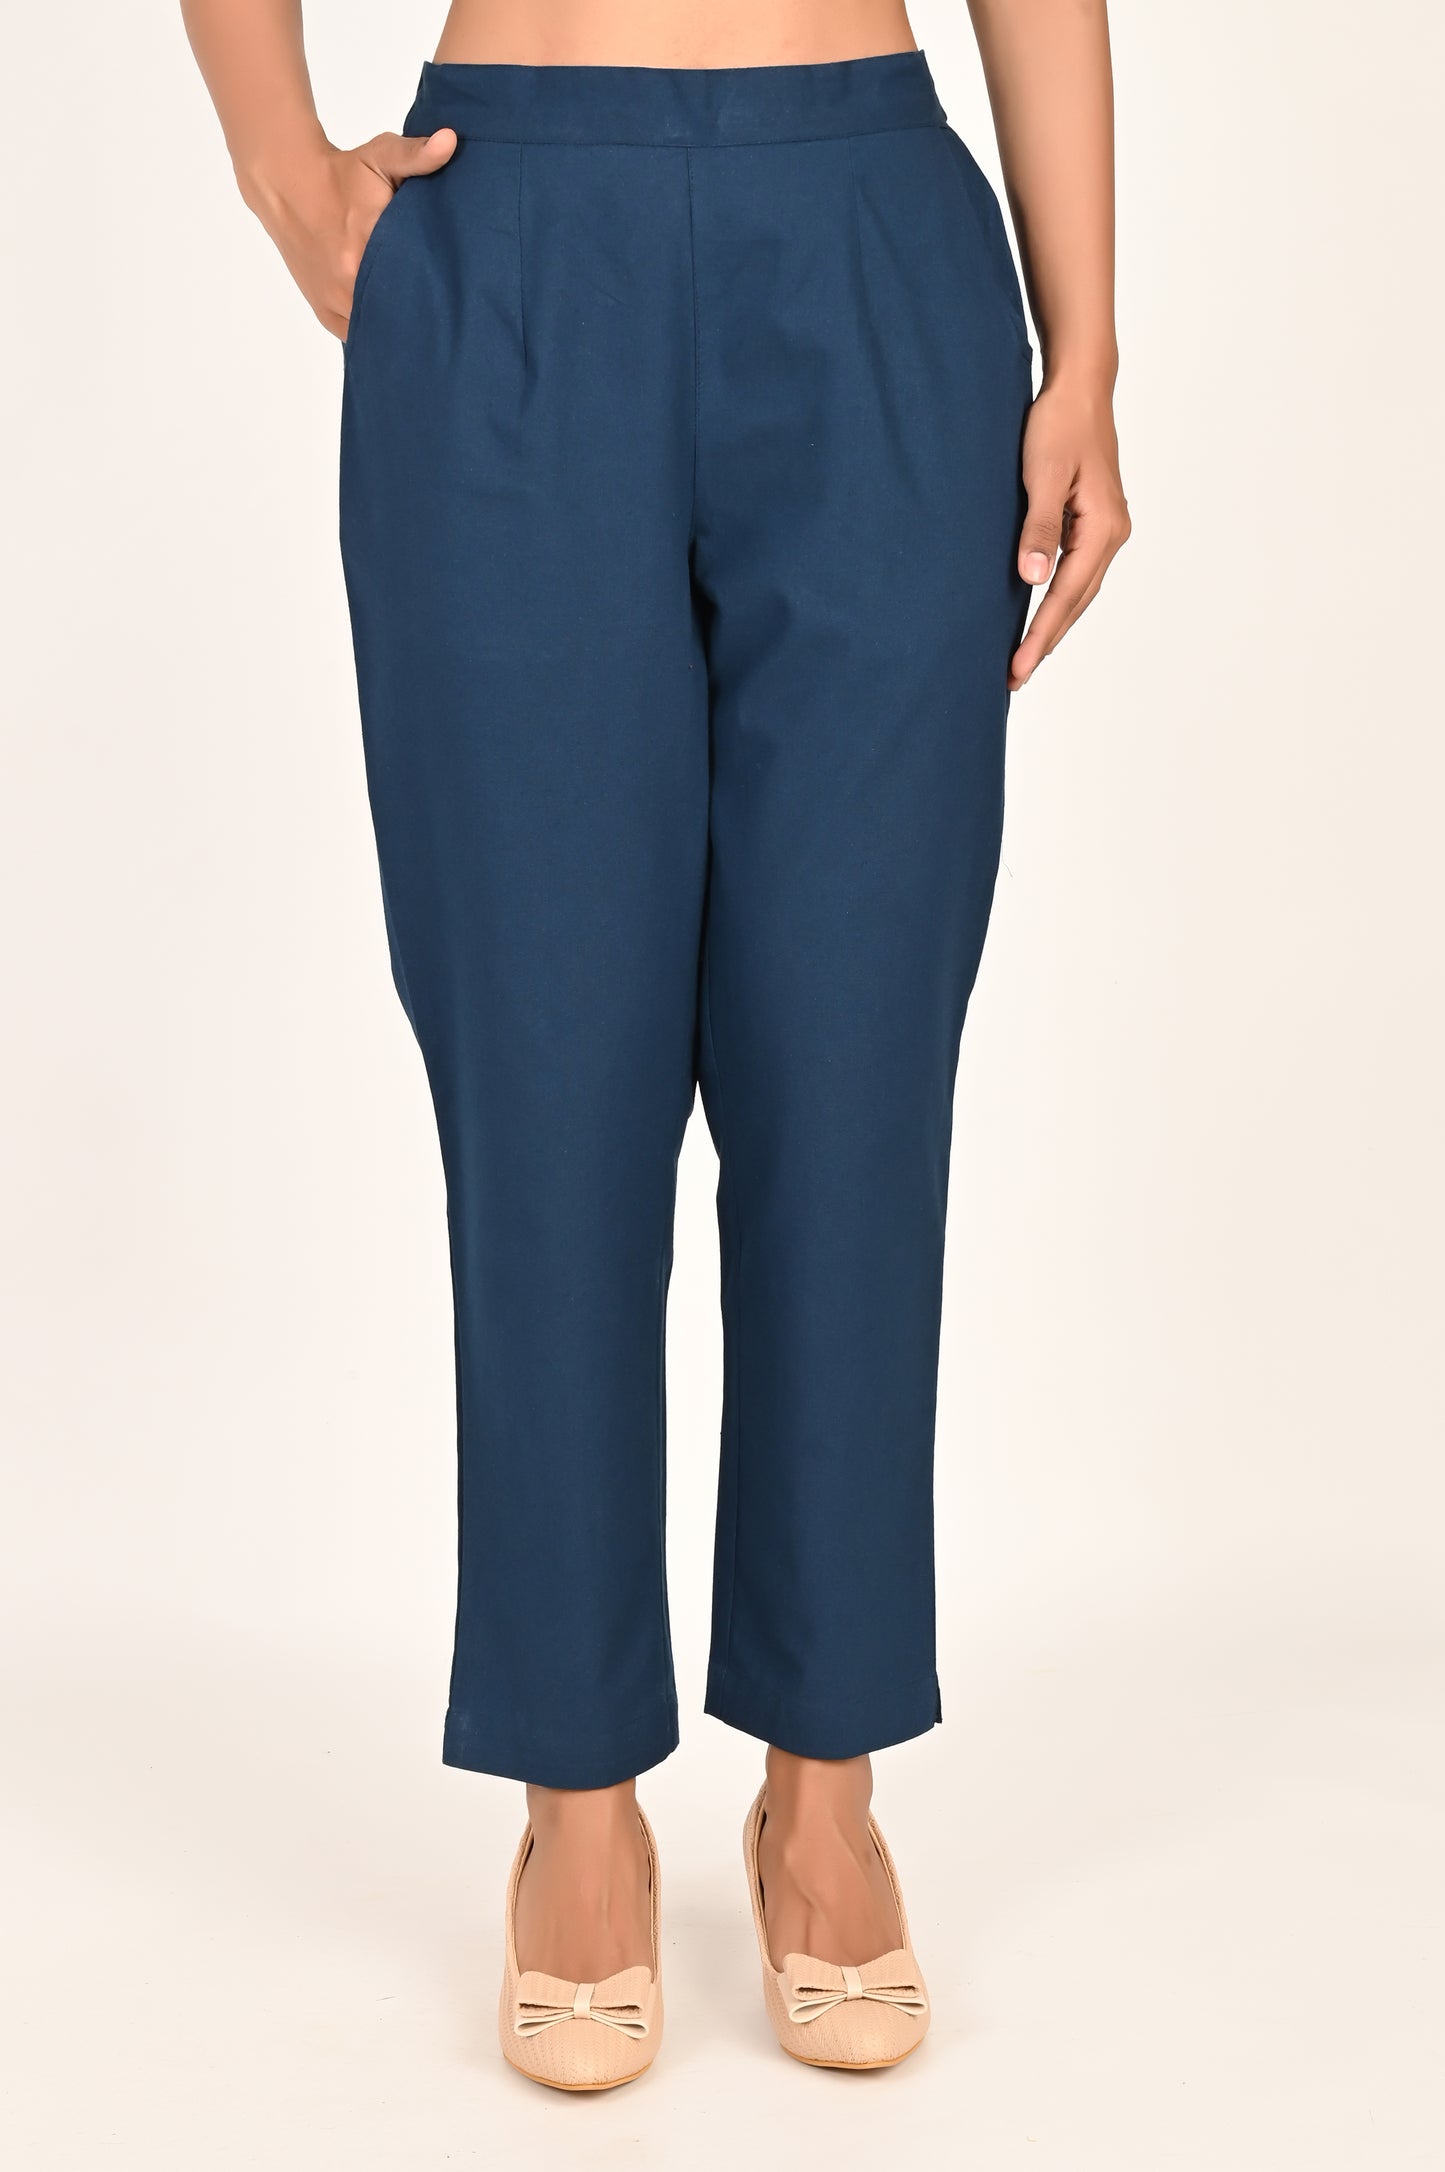 Peacock Blue Everyday Cotton Pant